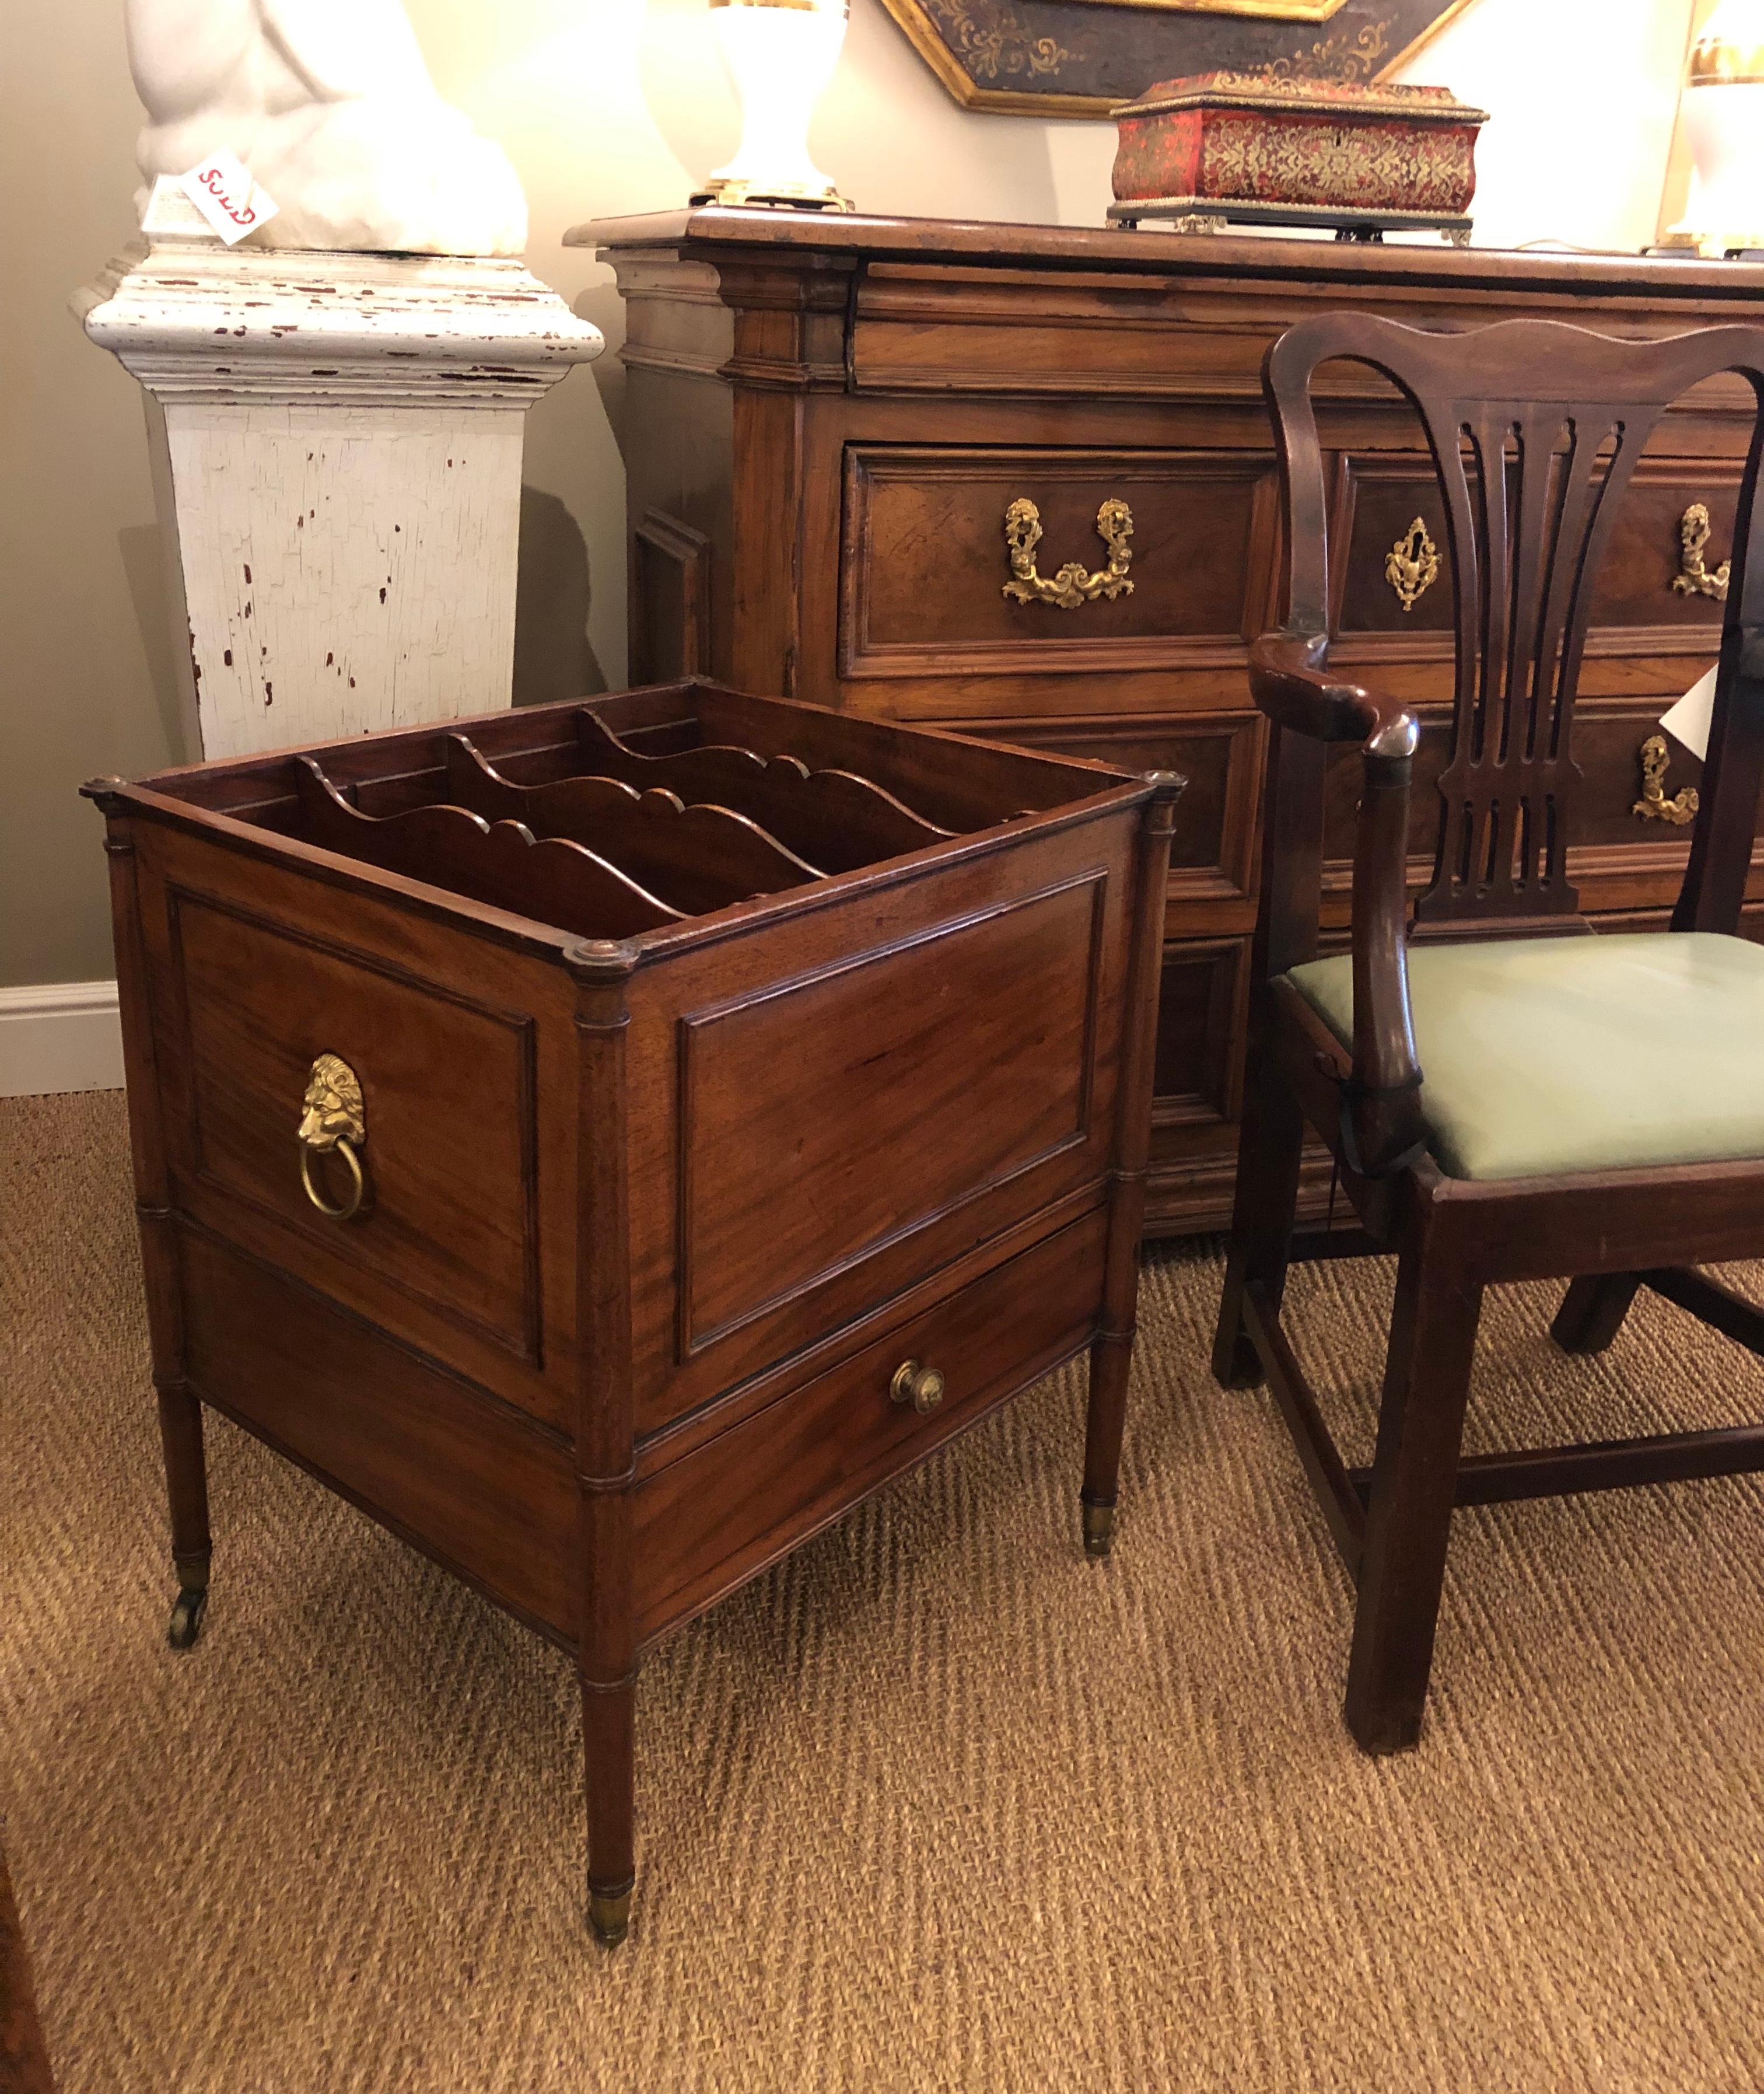 One of the largest and best qualities Georgian Canterbury's, fitted with 3 adjustable serpentine dividers within a rectangular body with applied moldings and lion ring handles, the columnar corners continuing to tapering legs on brass casters.